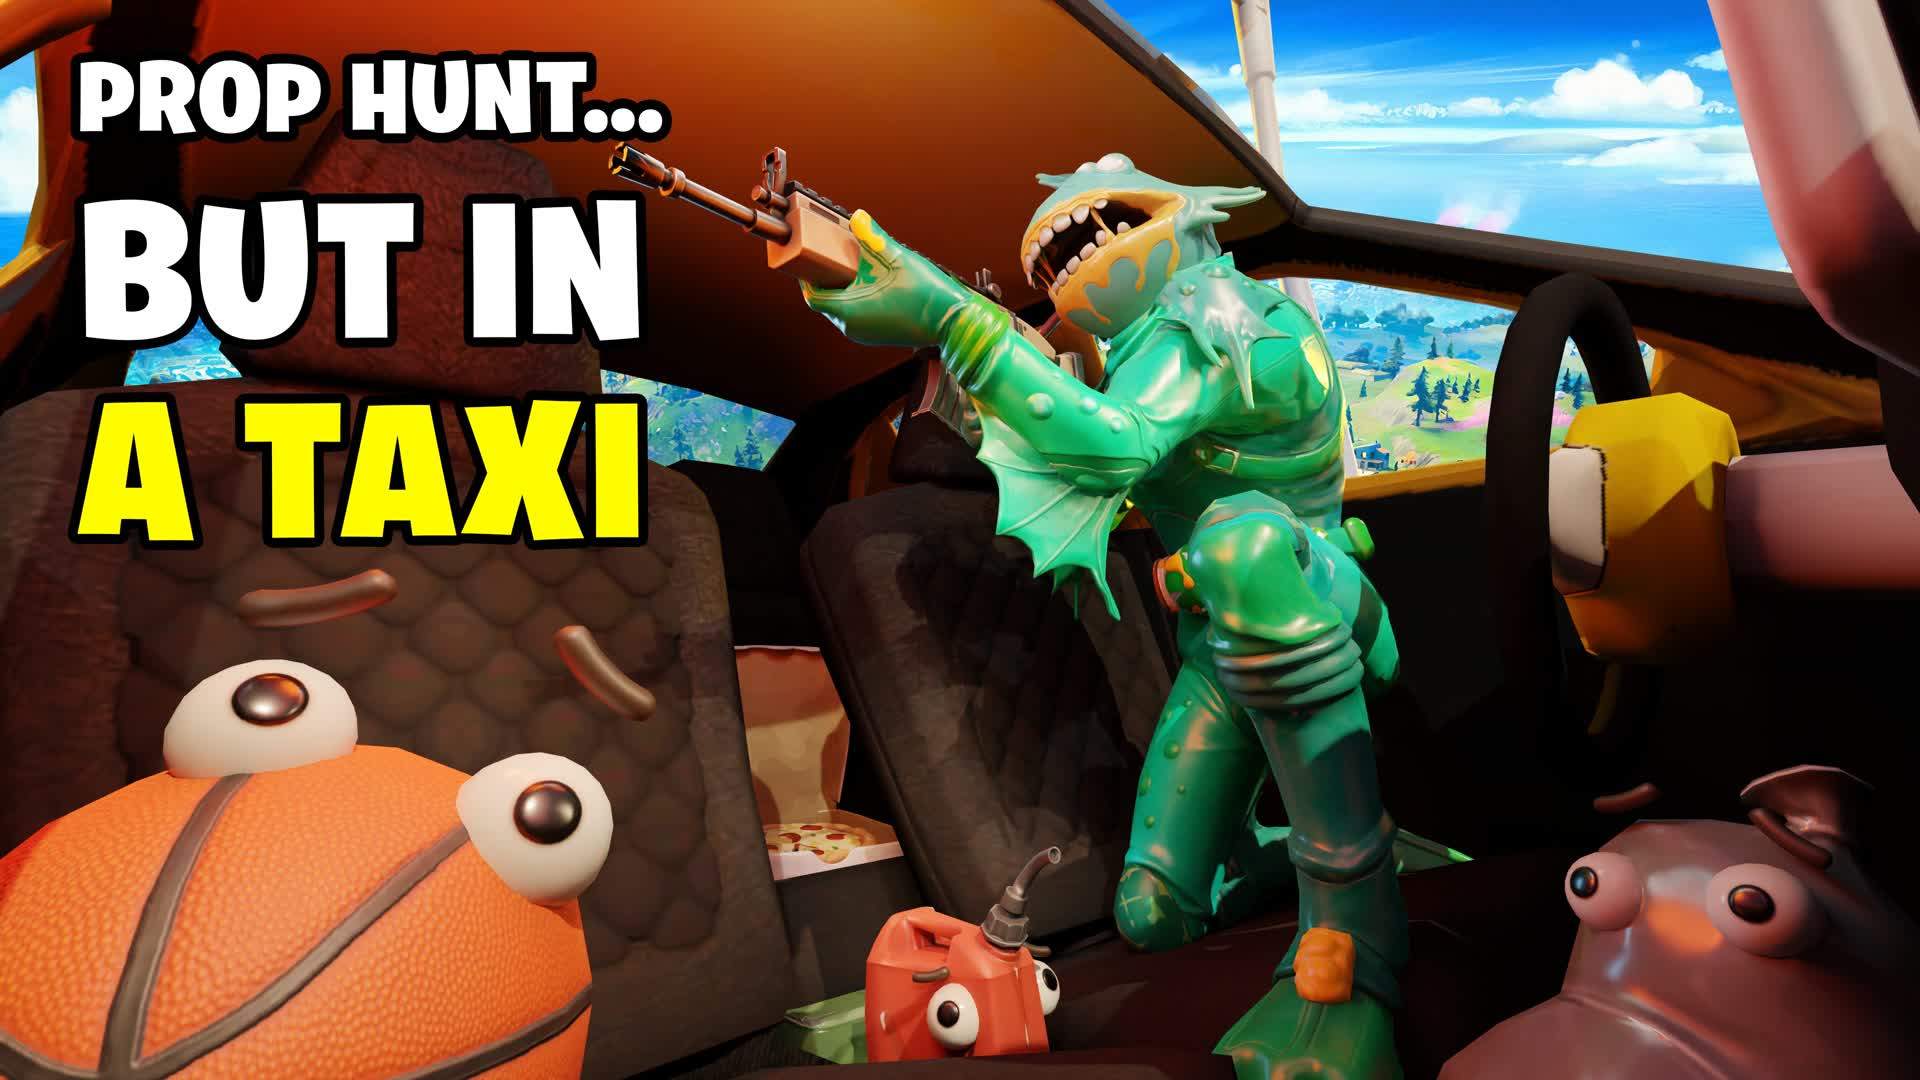 PROP HUNT...BUT IN A TAXI 🚖 1662-3121-3063